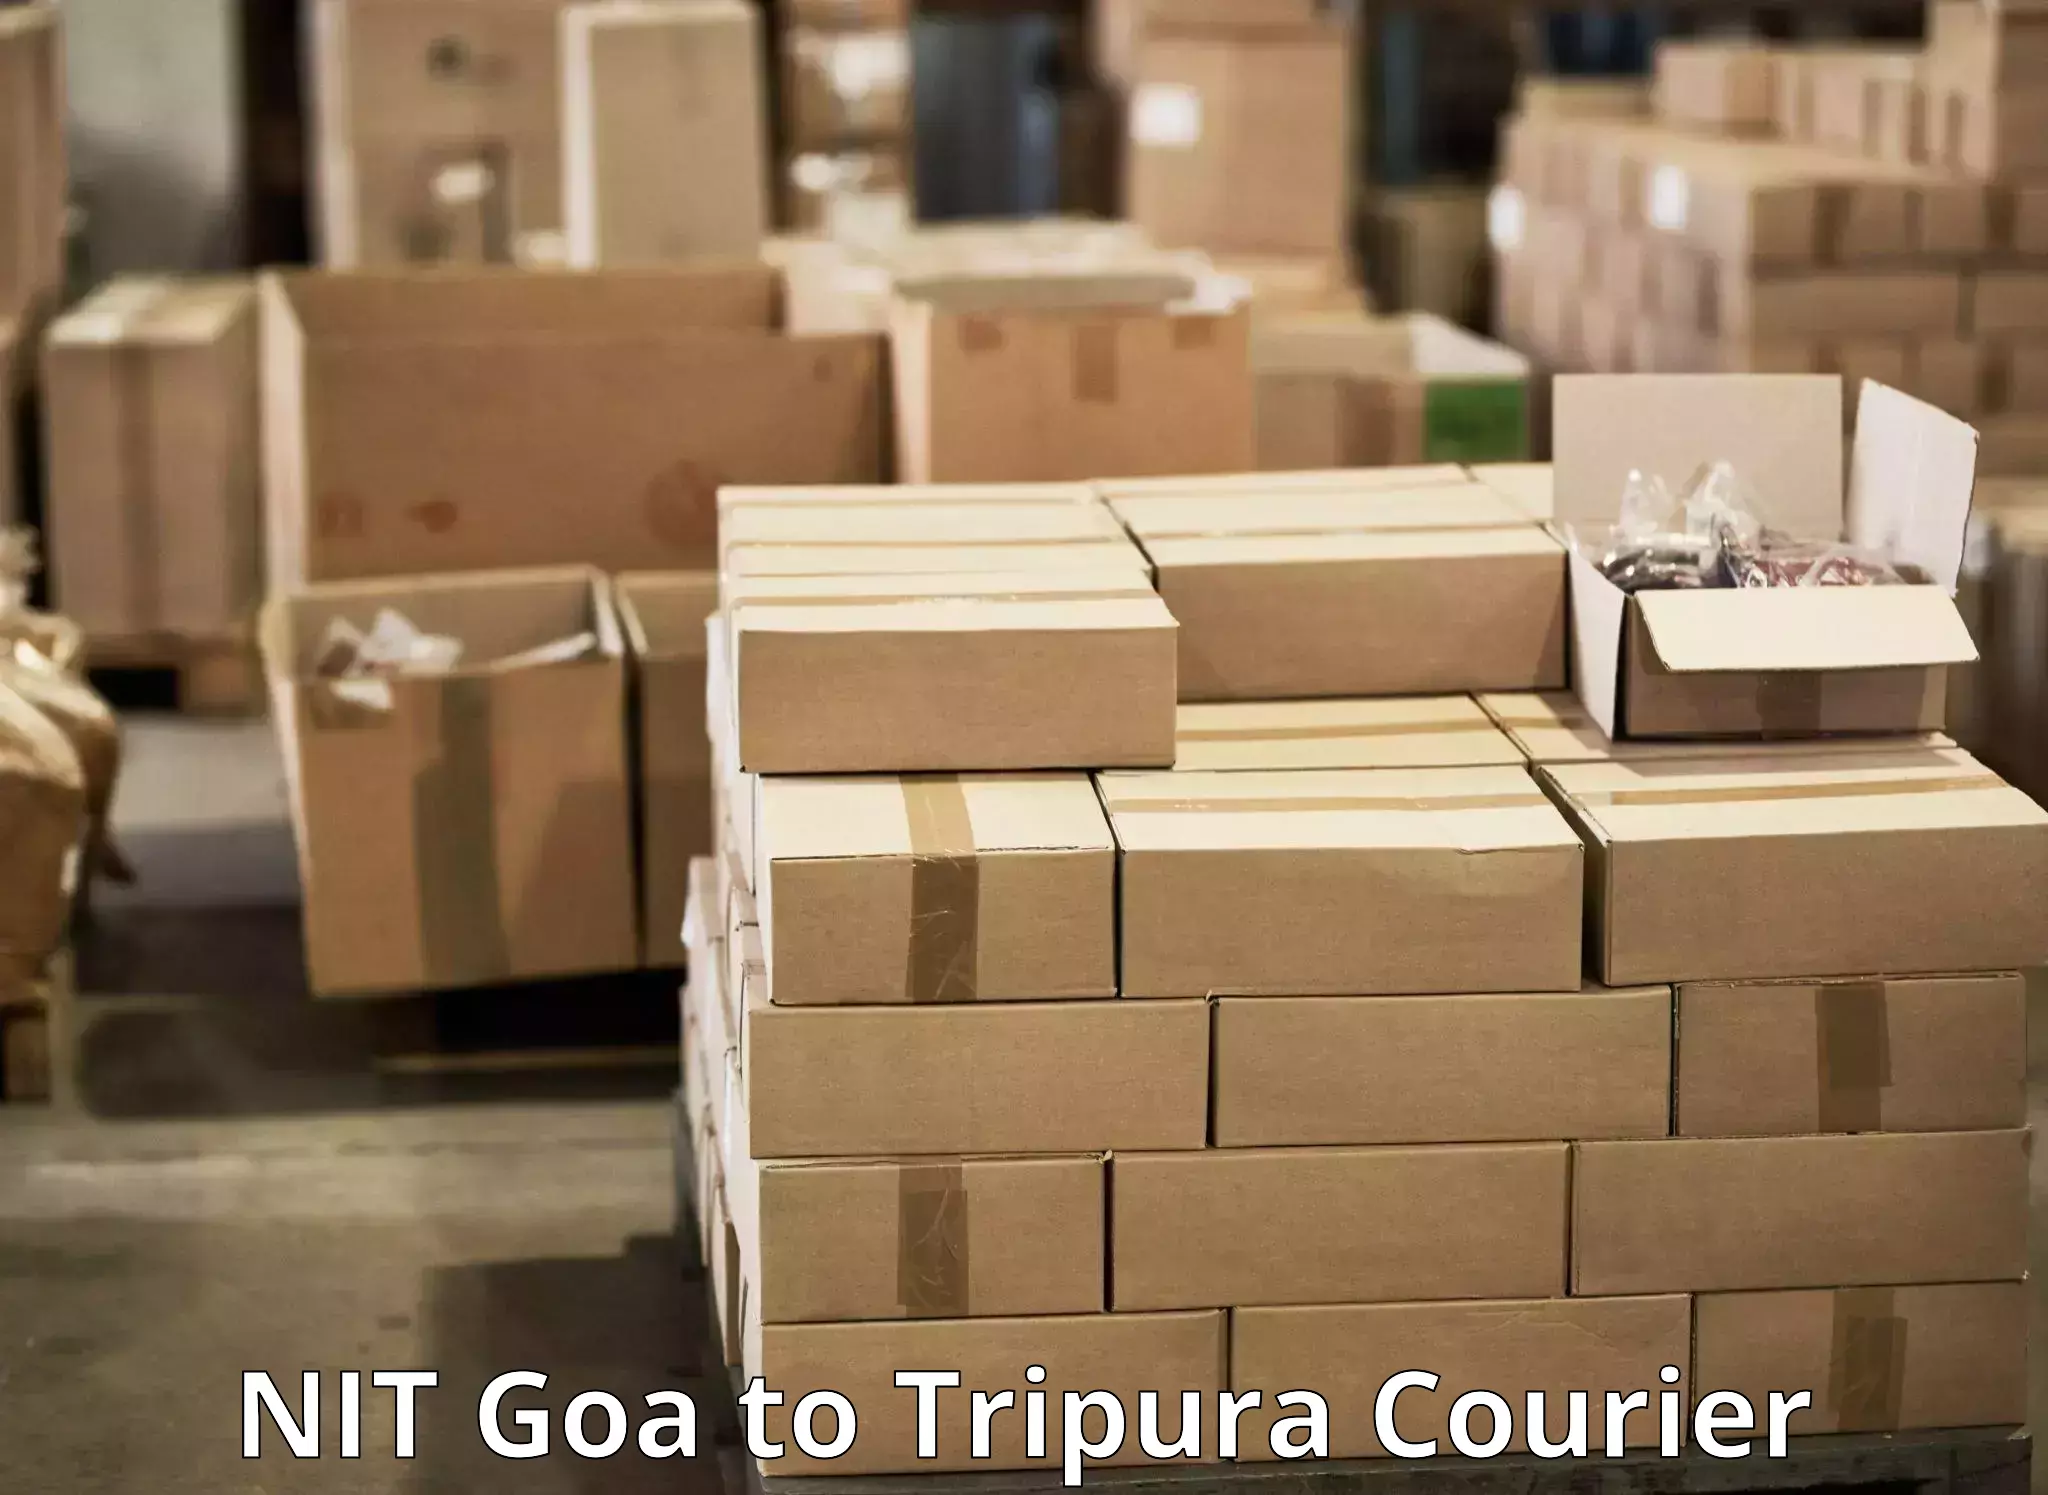 24-hour courier services in NIT Goa to Tripura